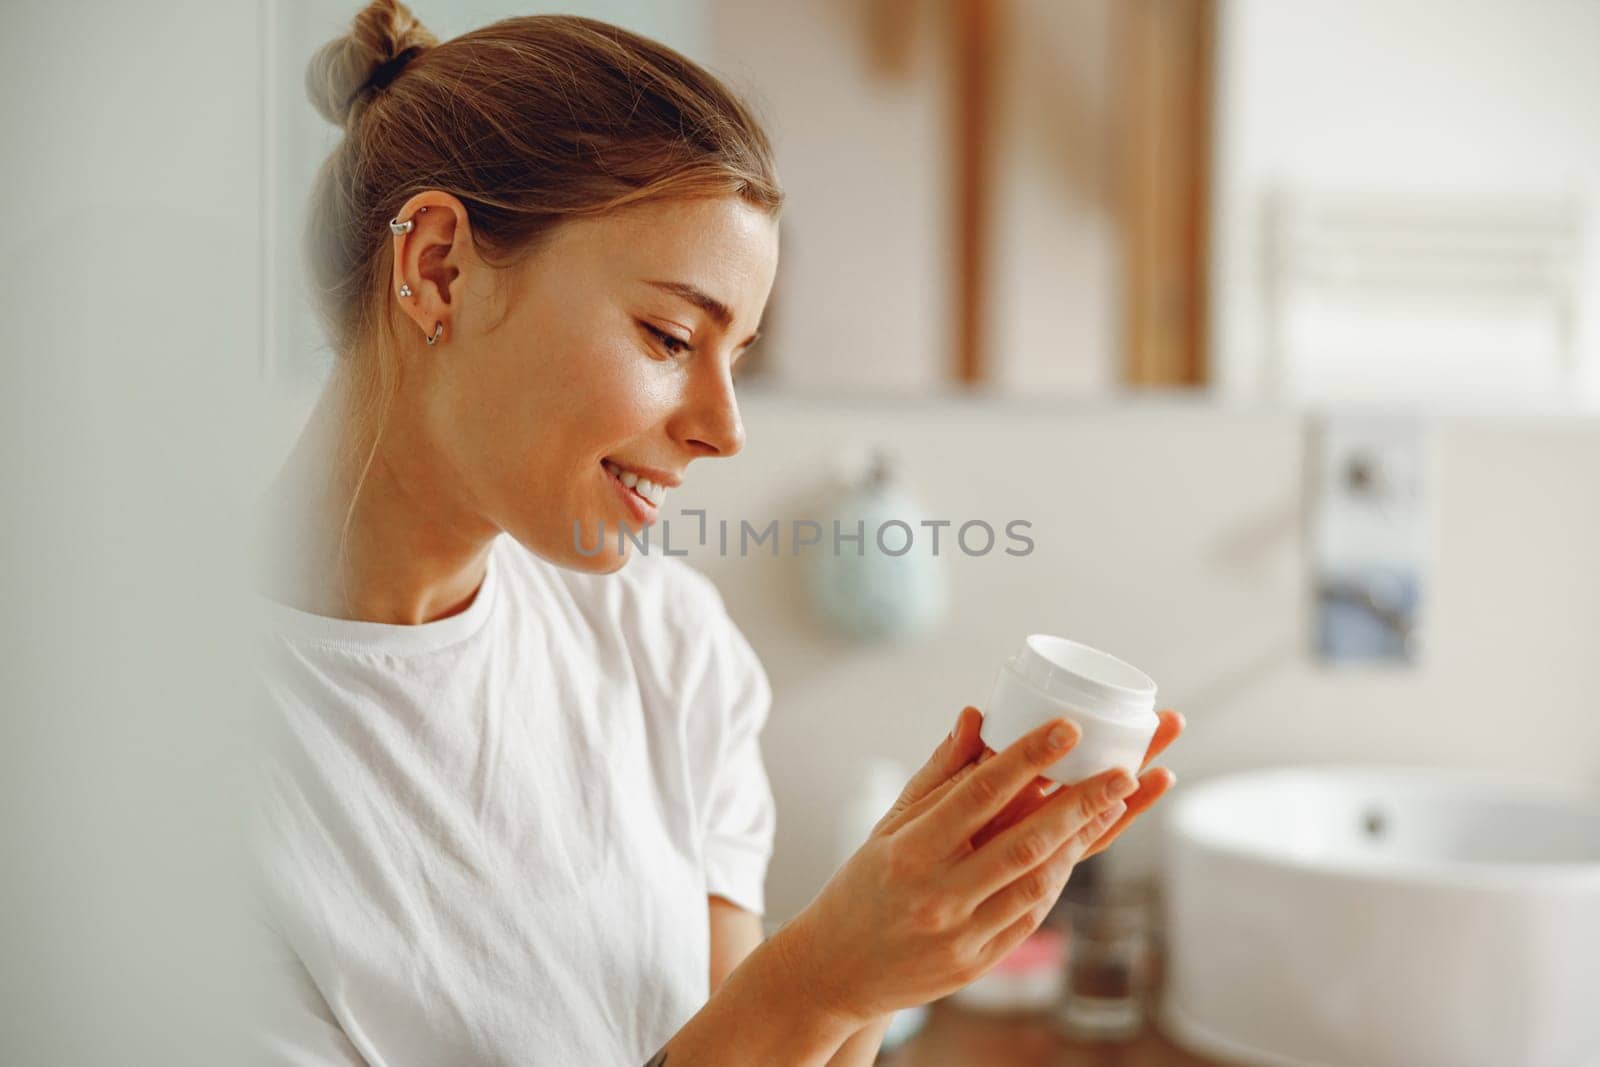 Smiling woman holding jar with skincare cream in hands. Home beauty routine